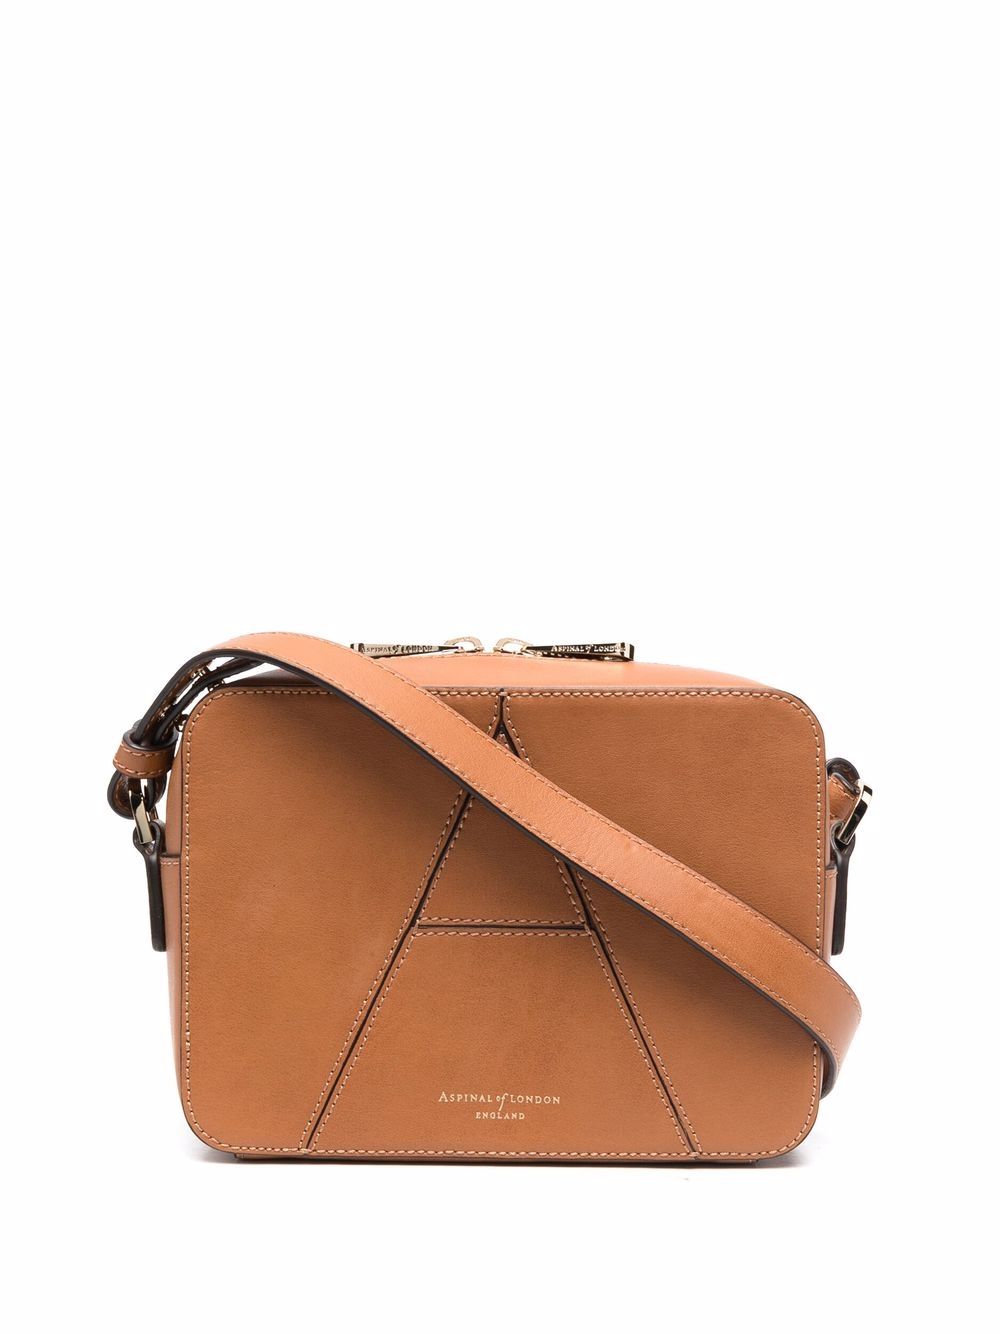 Aspinal Of London contrast stitching crossbody bag - Brown von Aspinal Of London